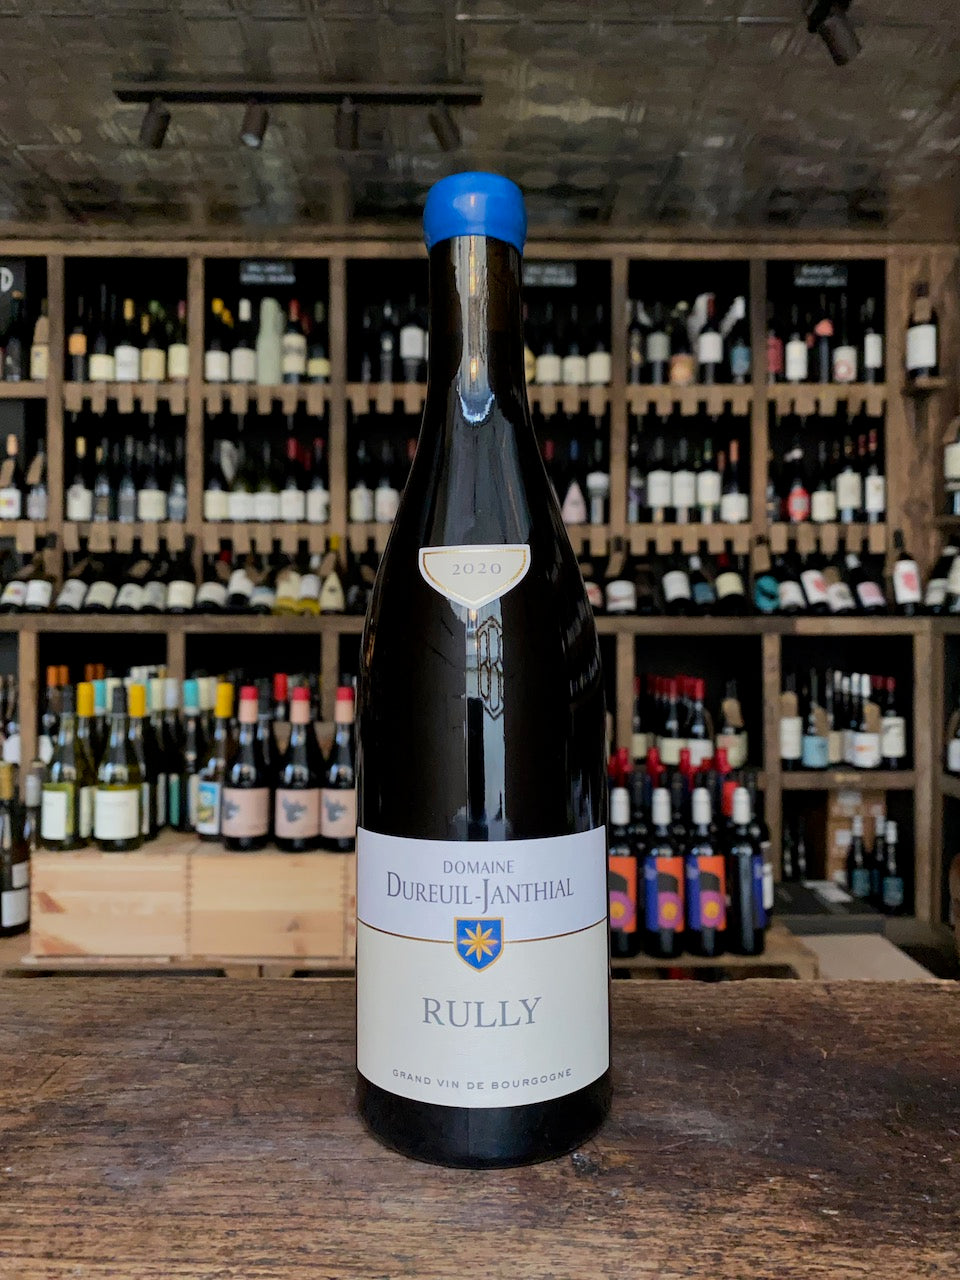 Rully Rouge, Domaine Dureuil-Janthial 2020